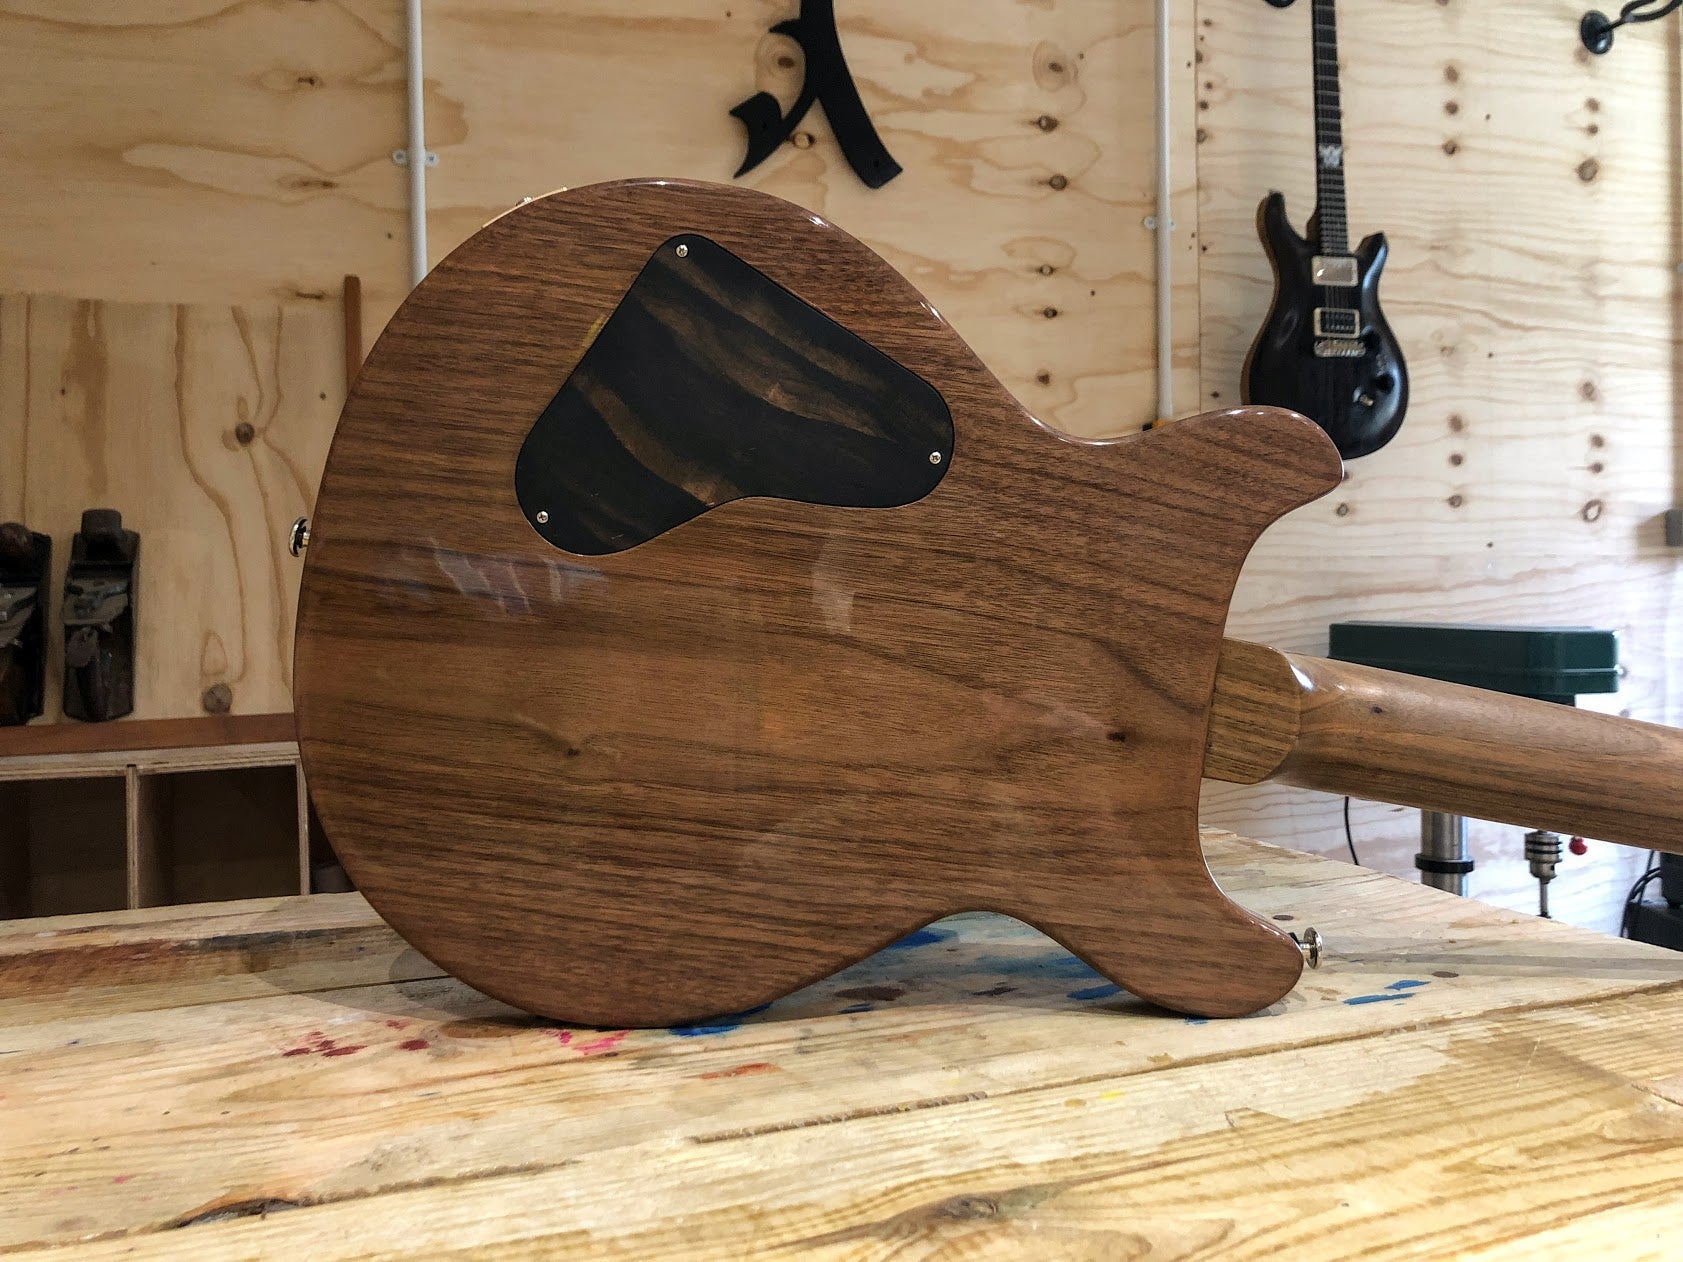 Ash Finlayson – The Great Guitar Build-off